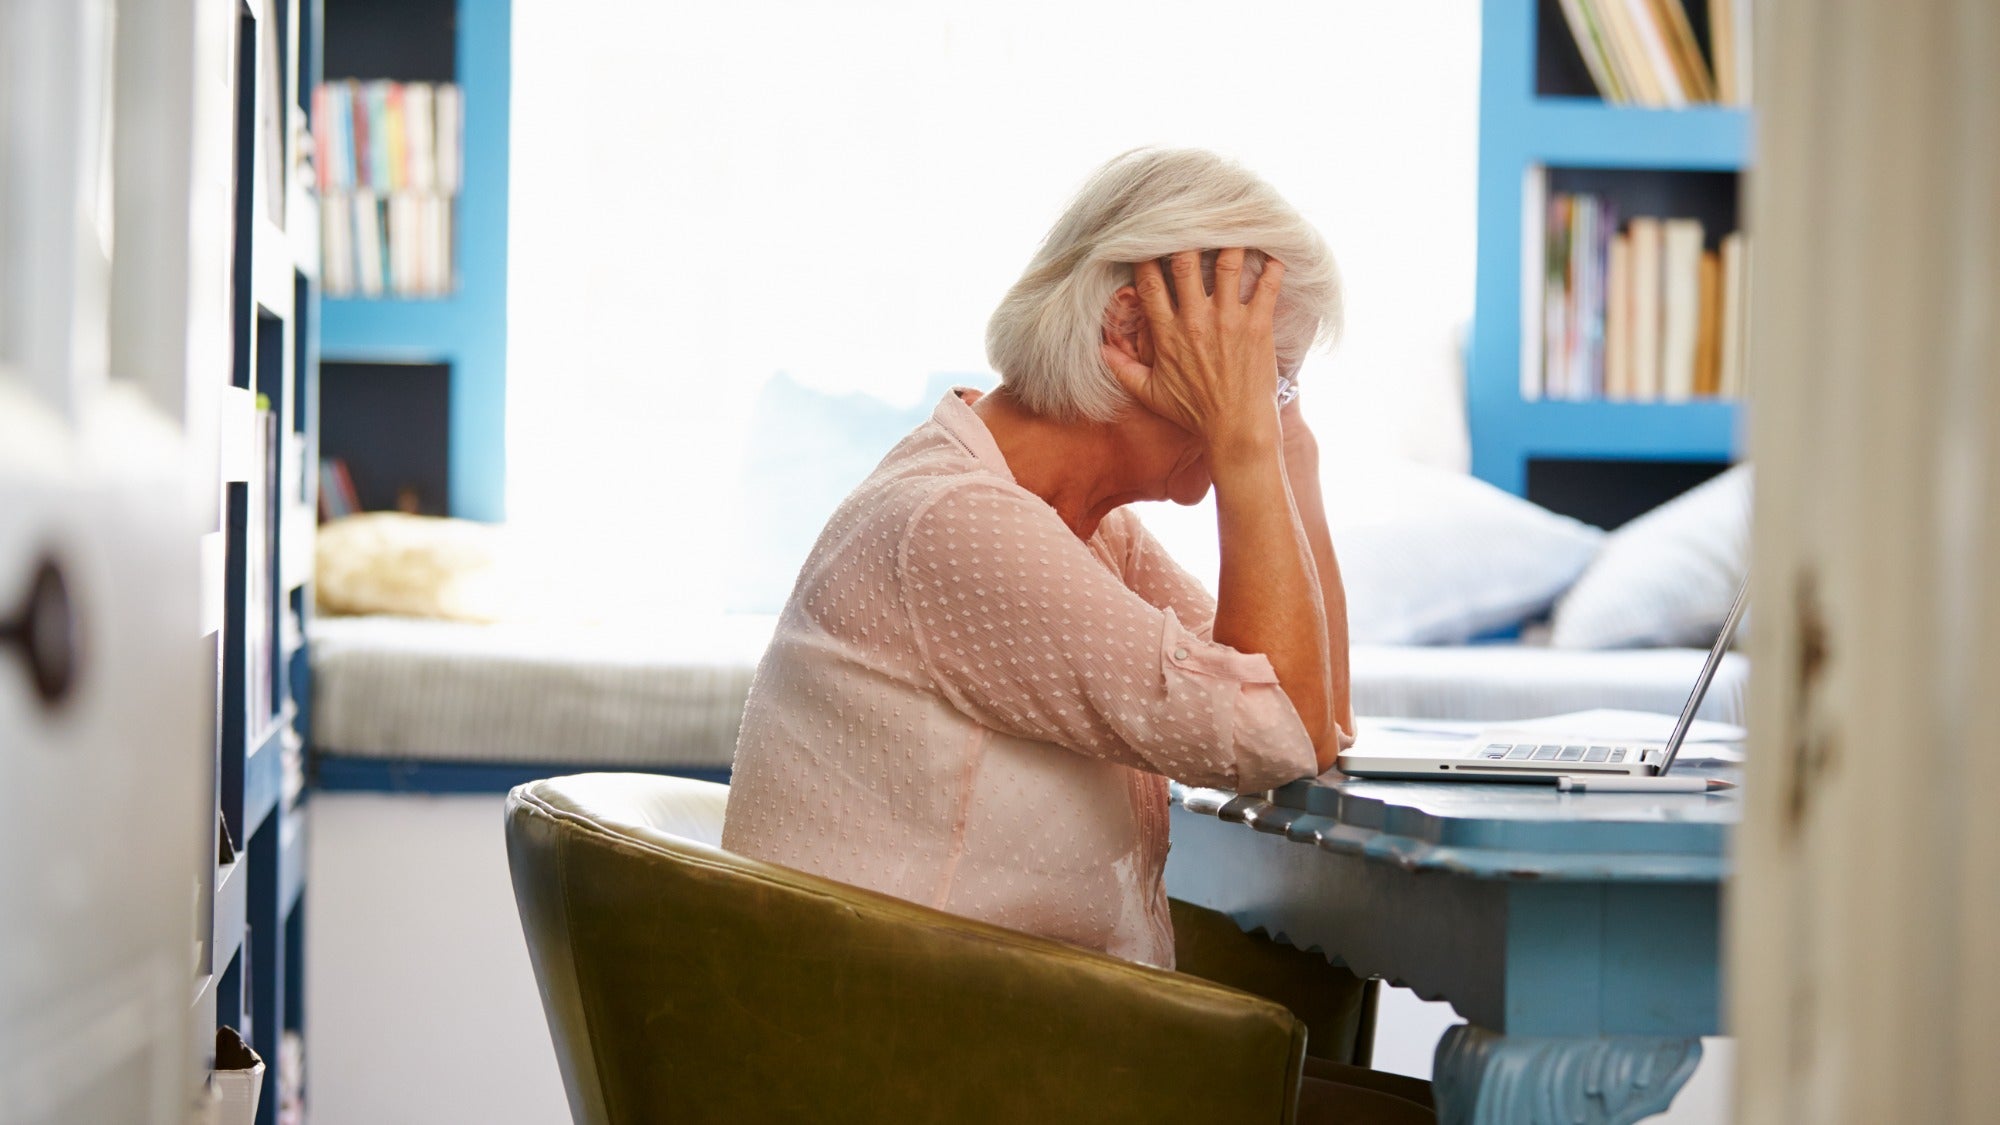 Seniors are combating power nervousness, however don’t search therapy